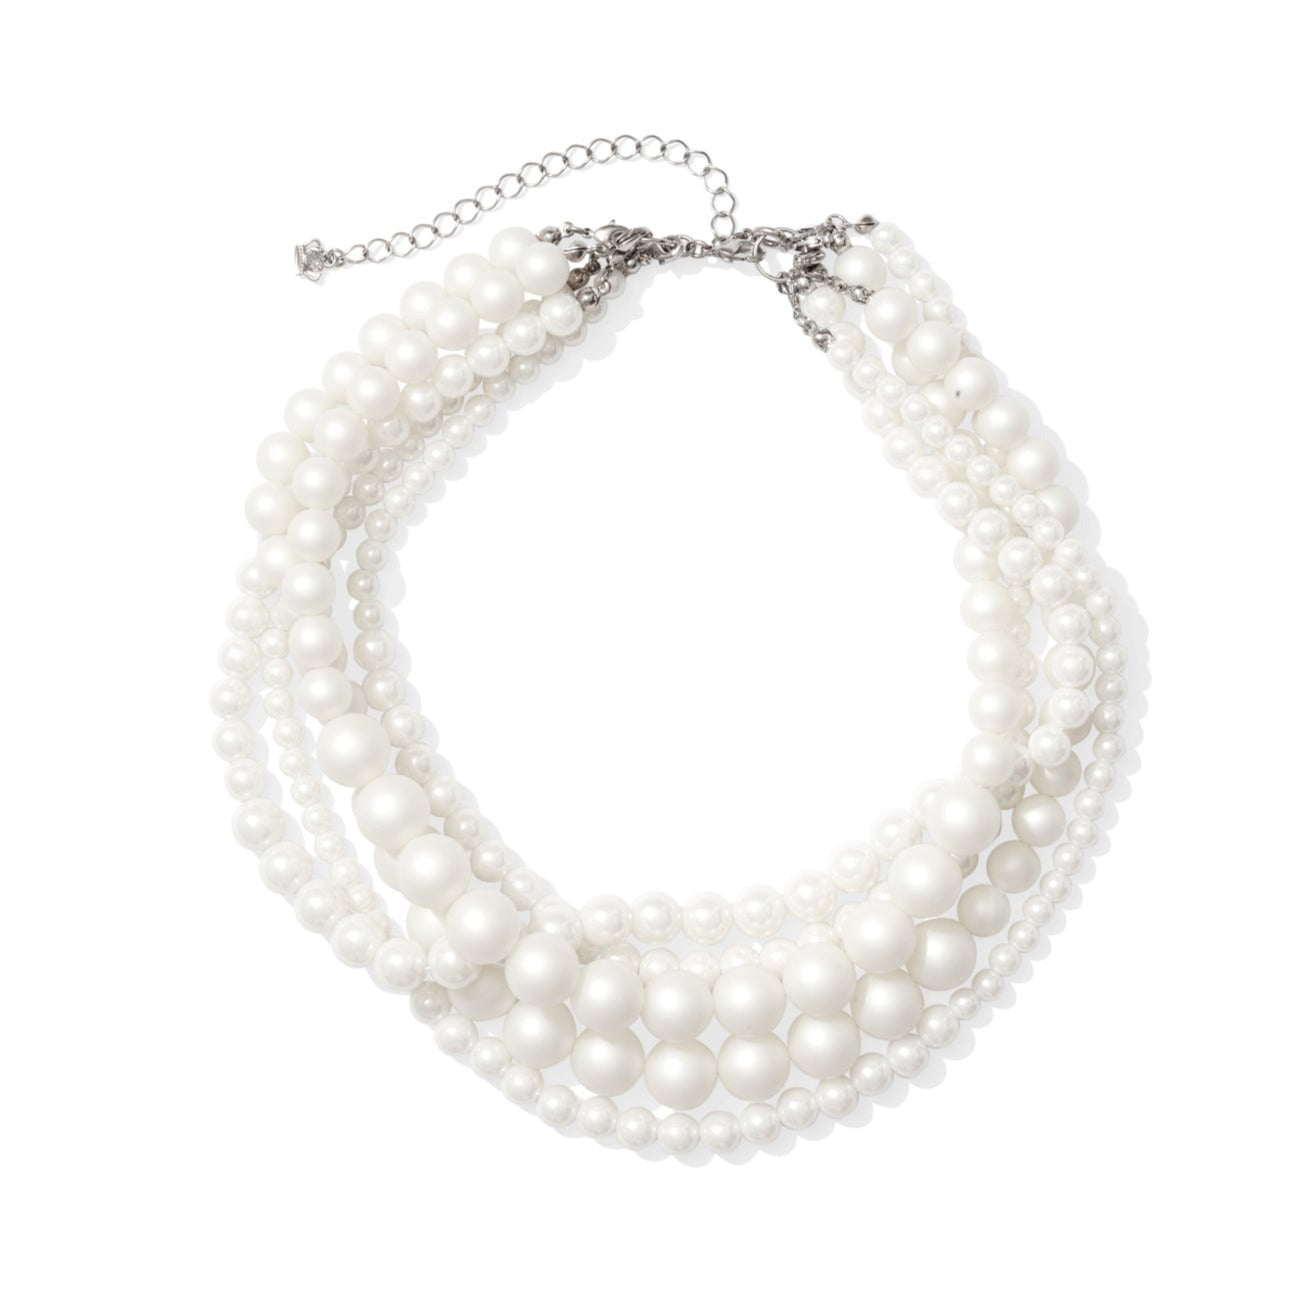 Three shiny and two matte strands of faux pearls with a silver clasp